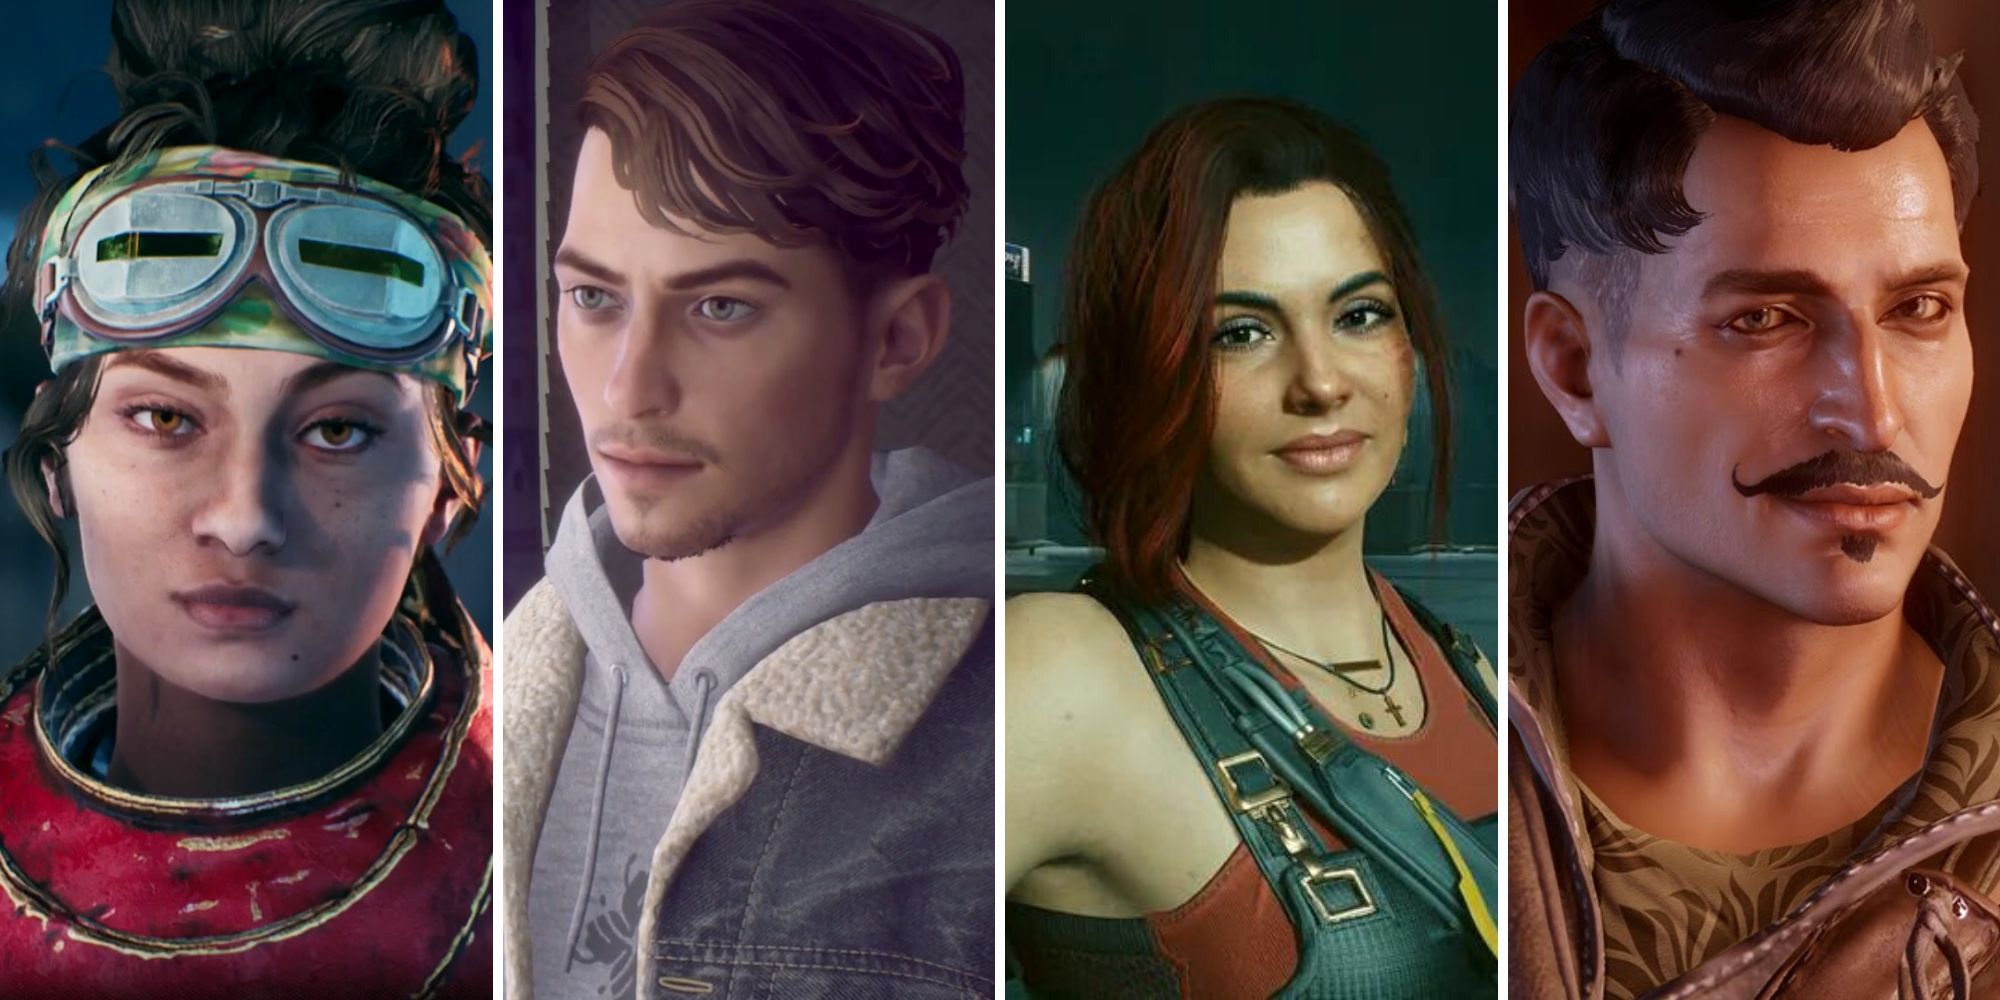 Parvati - Outer Worlds; Tyler - Tell Me Why; Claire - Cyberpunk 2077; Dorian - Dragon Age Inquisition